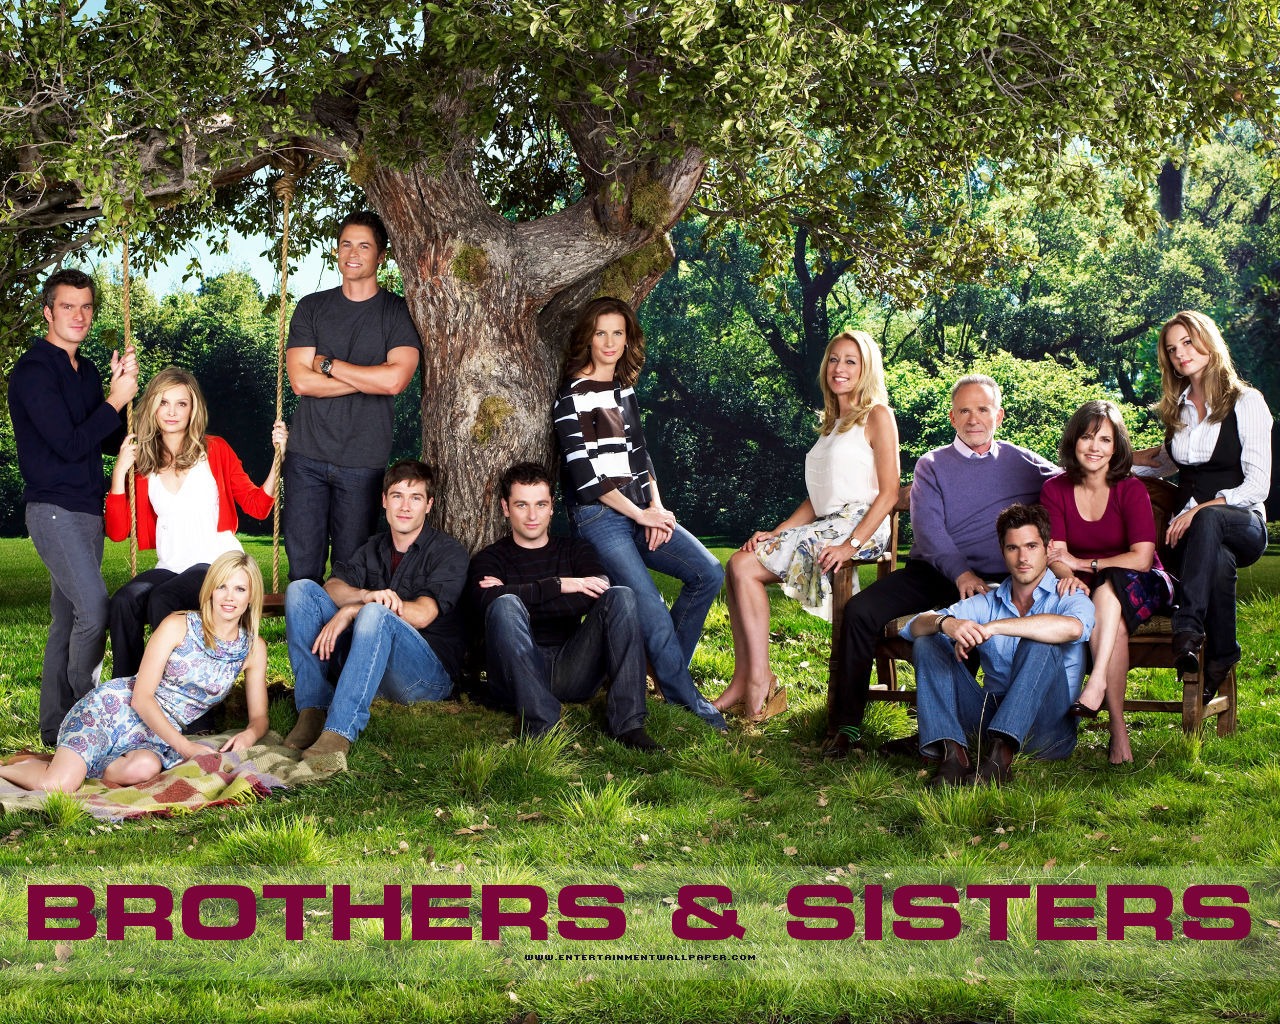 Brothers & Sisters 兄弟姐妹9 - 1280x1024